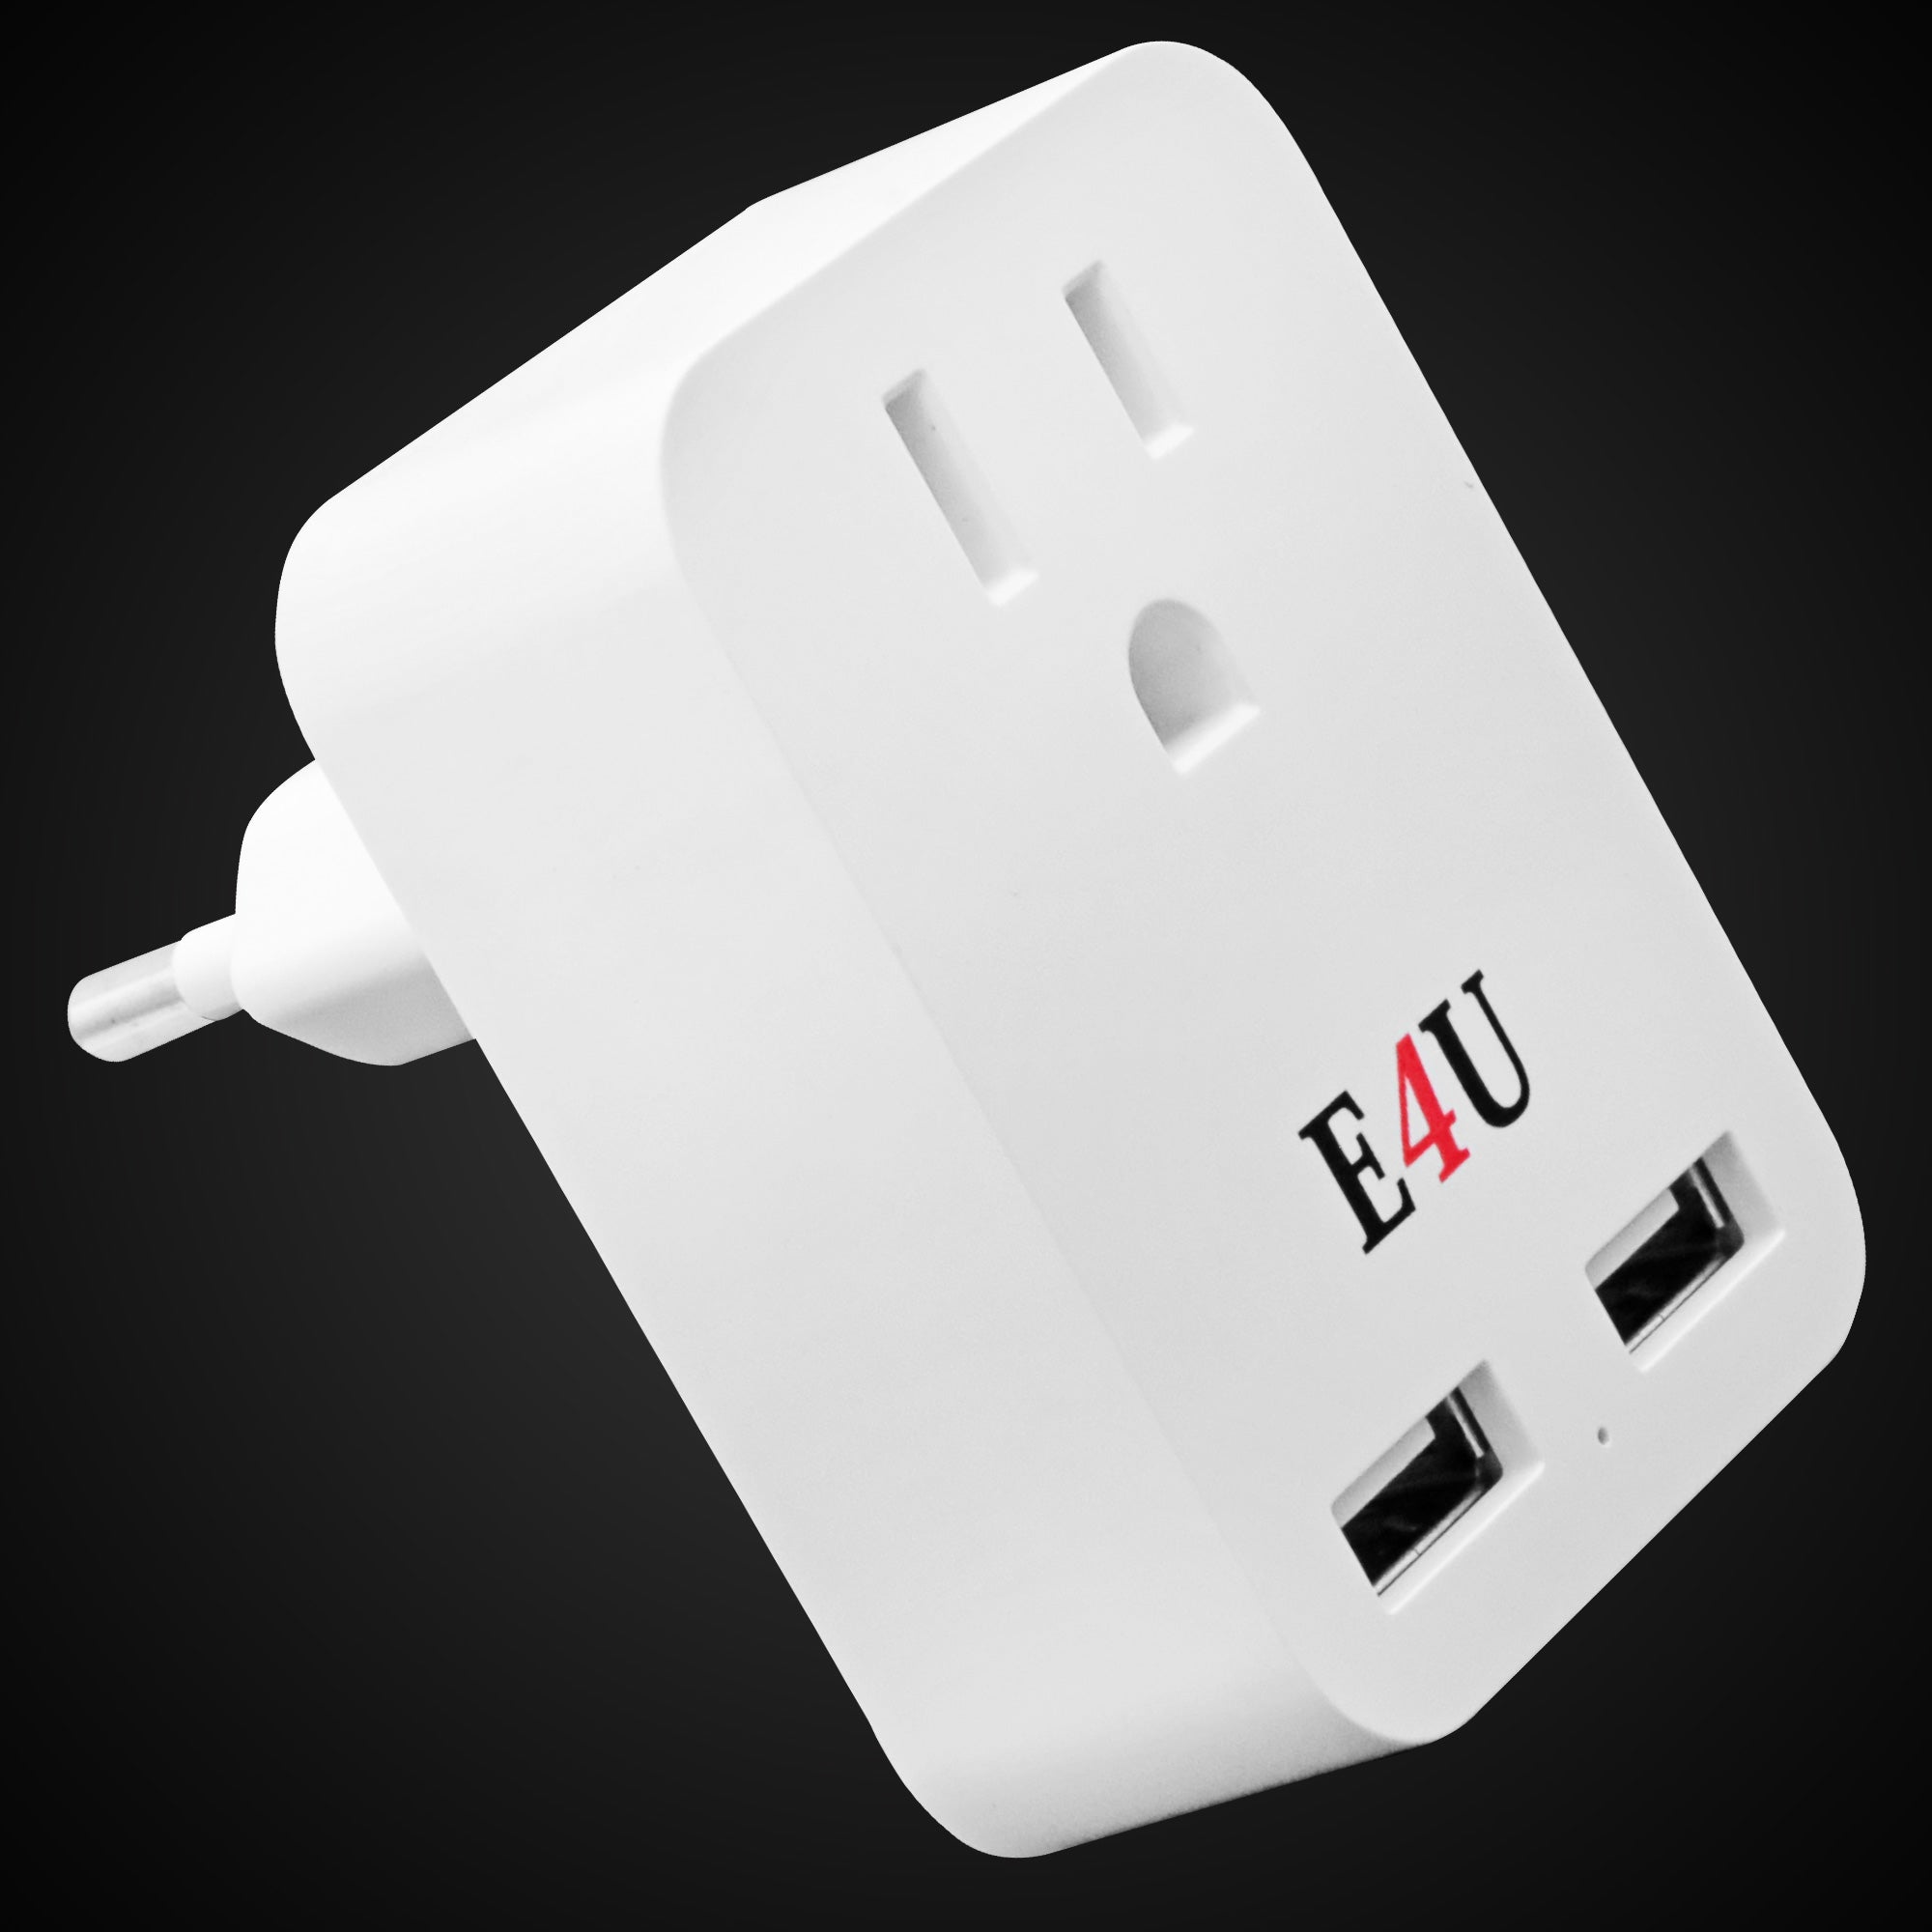 5Core USB Wall Charger Charging Blocks Power Outlet w 2 USB Ports & 1 AC Plug Expander w Surge Protector